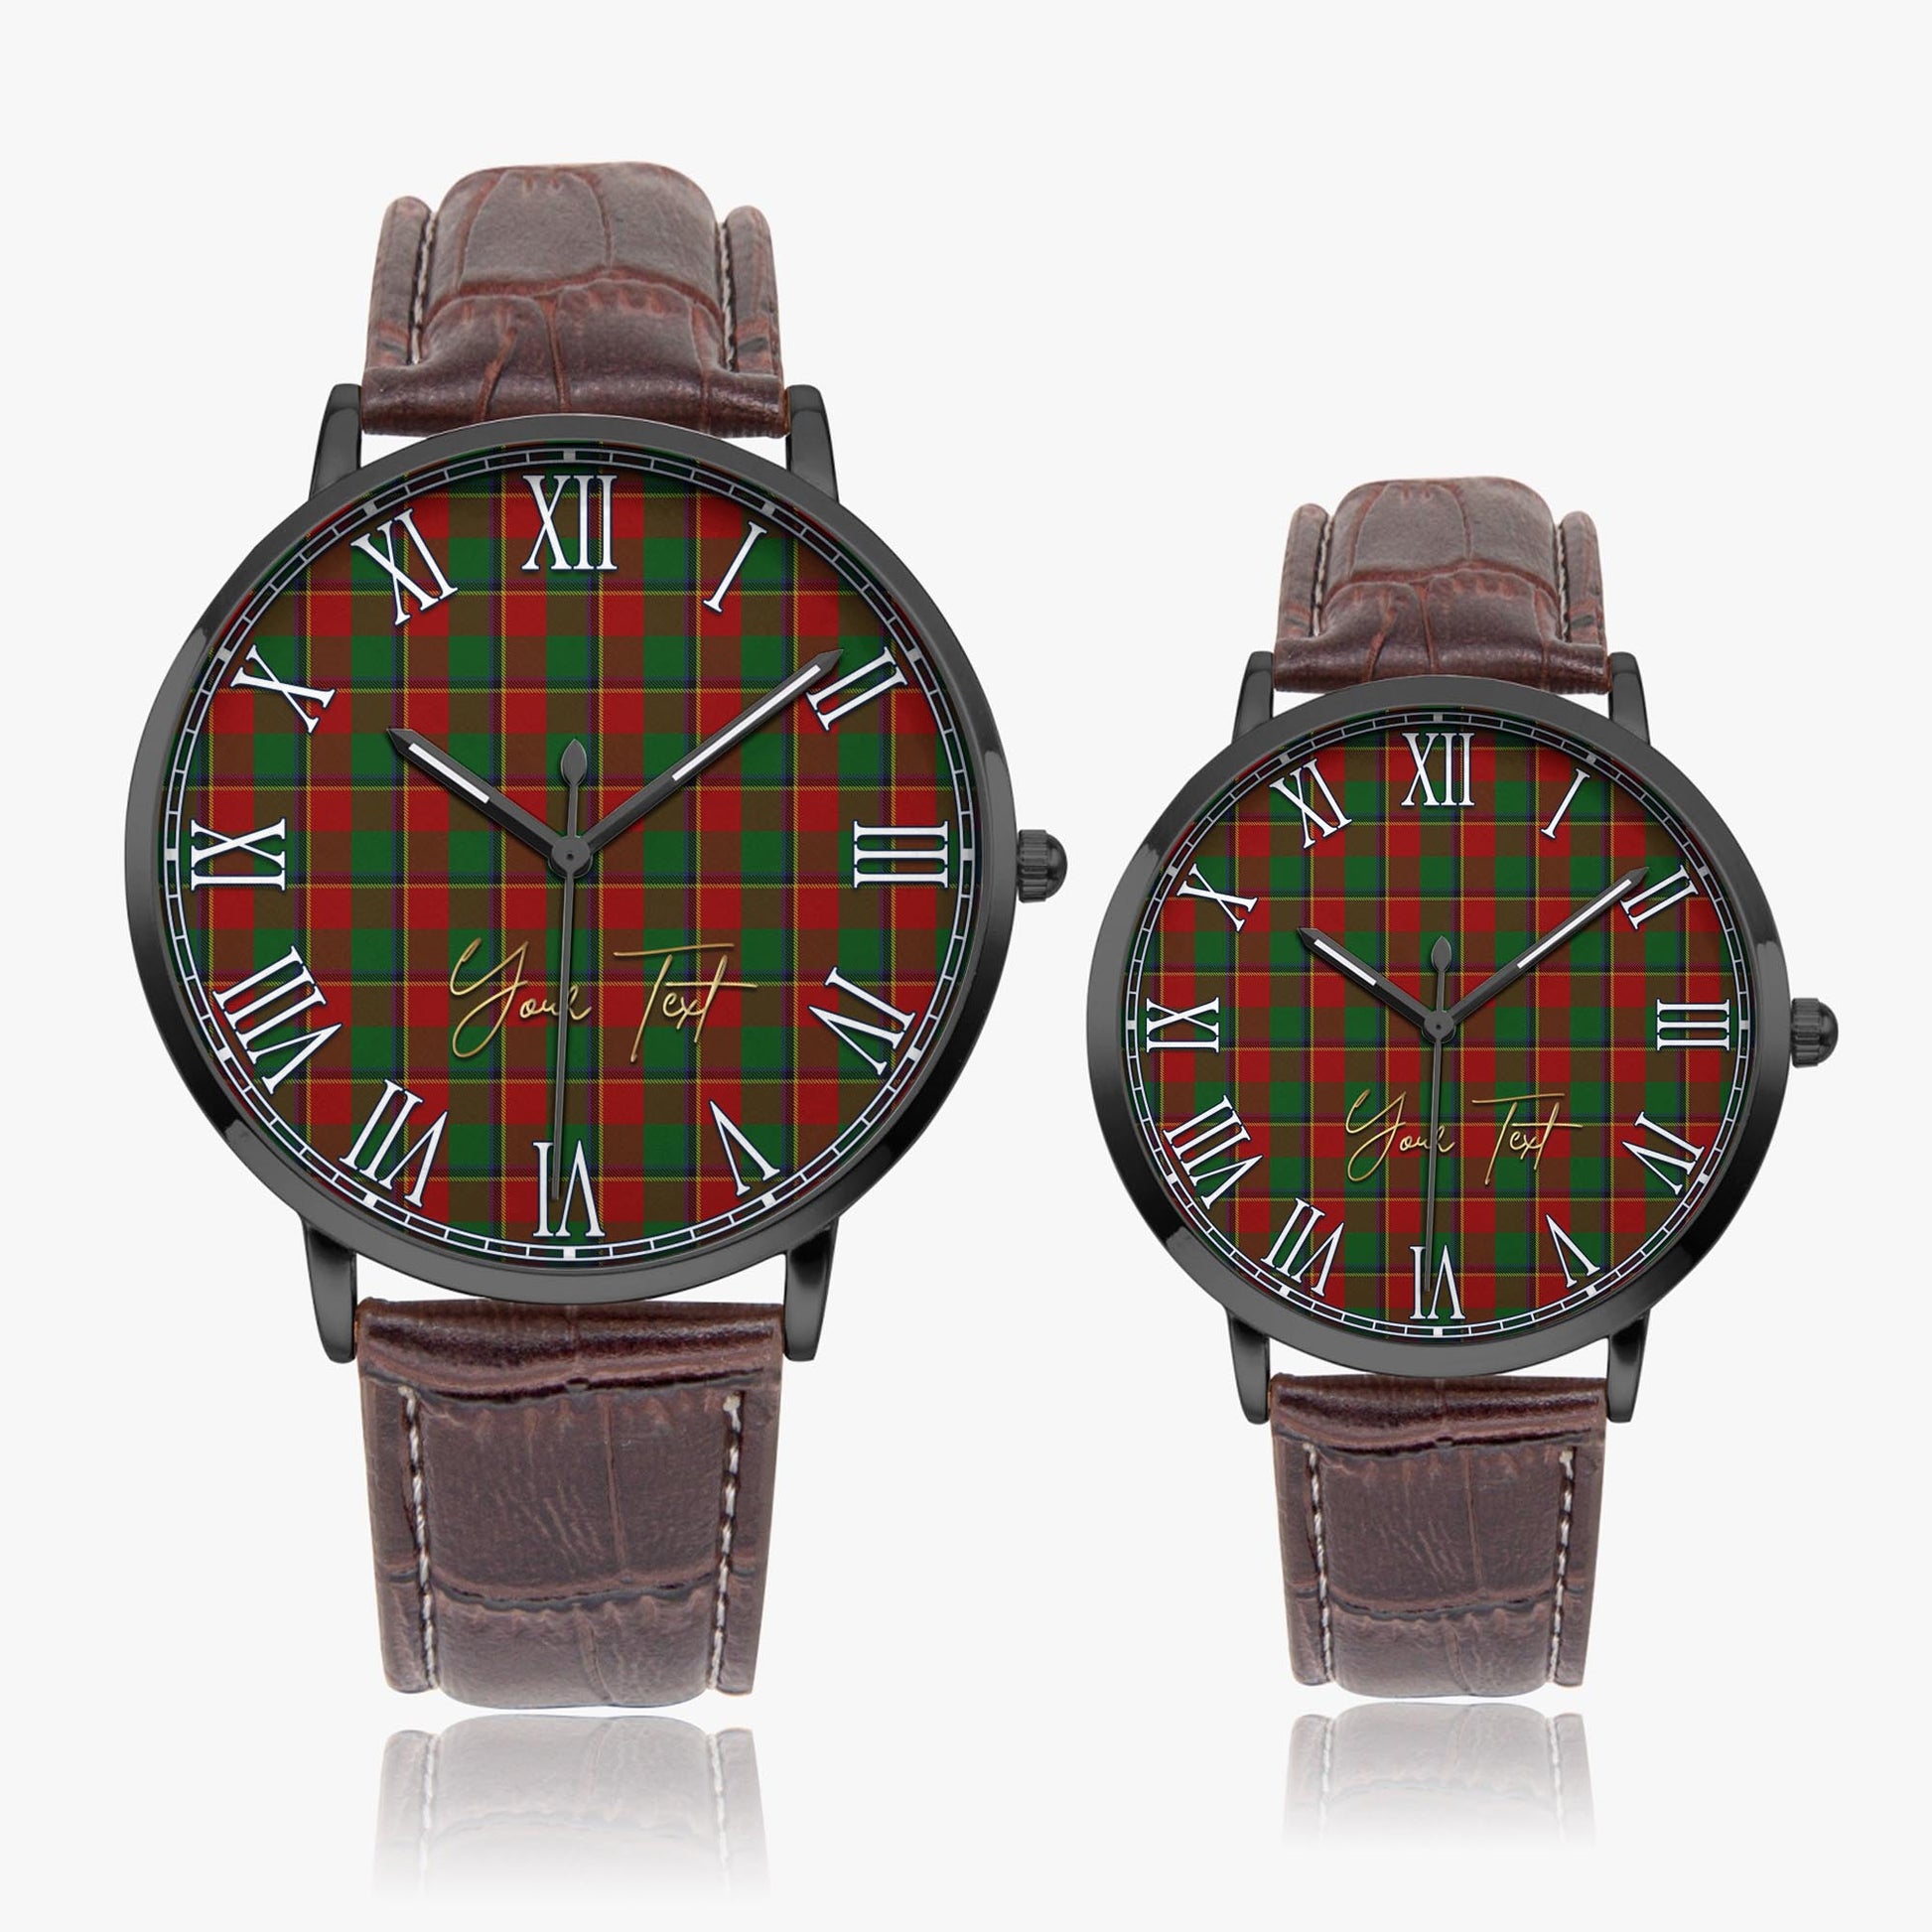 Turnbull Dress Tartan Personalized Your Text Leather Trap Quartz Watch Ultra Thin Black Case With Brown Leather Strap - Tartanvibesclothing Shop